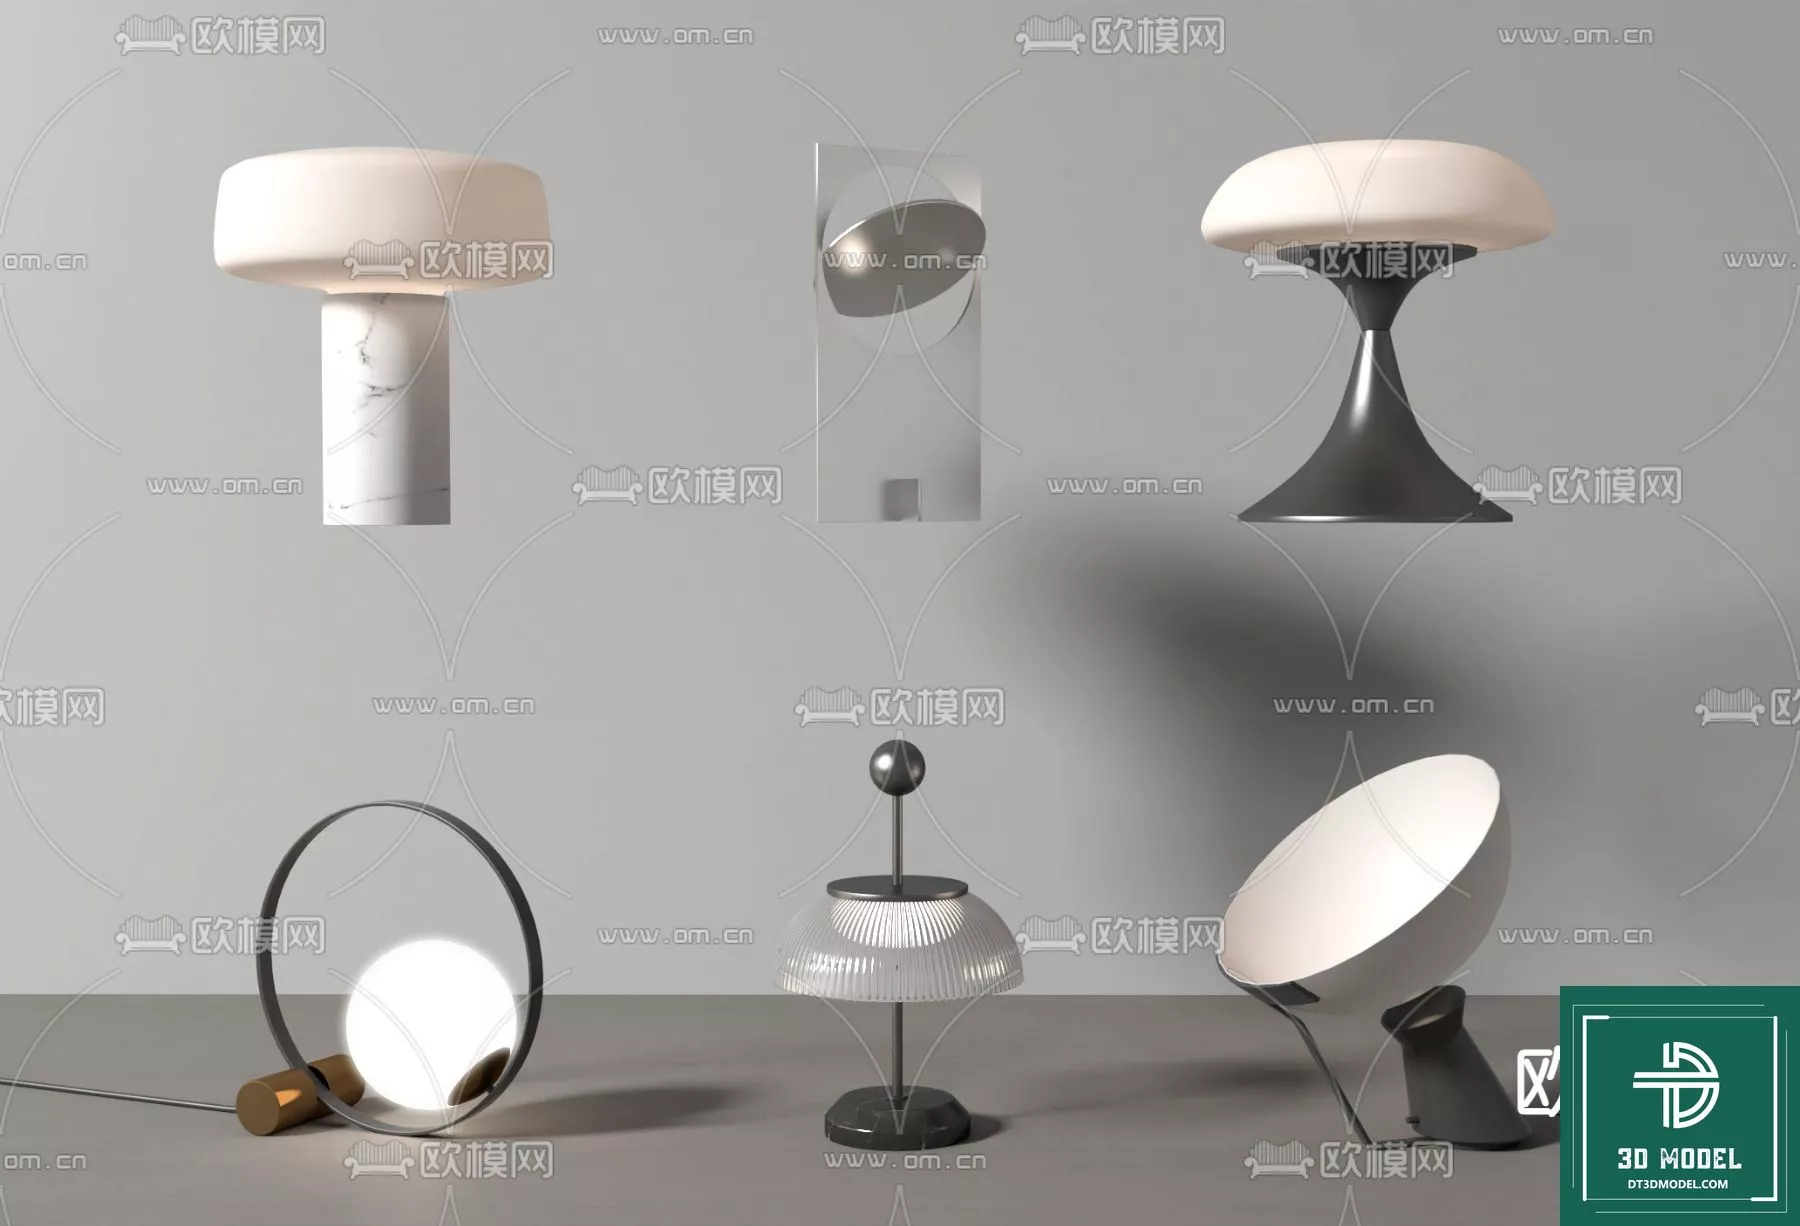 MODERN TABLE LAMP - SKETCHUP 3D MODEL - VRAY OR ENSCAPE - ID14601